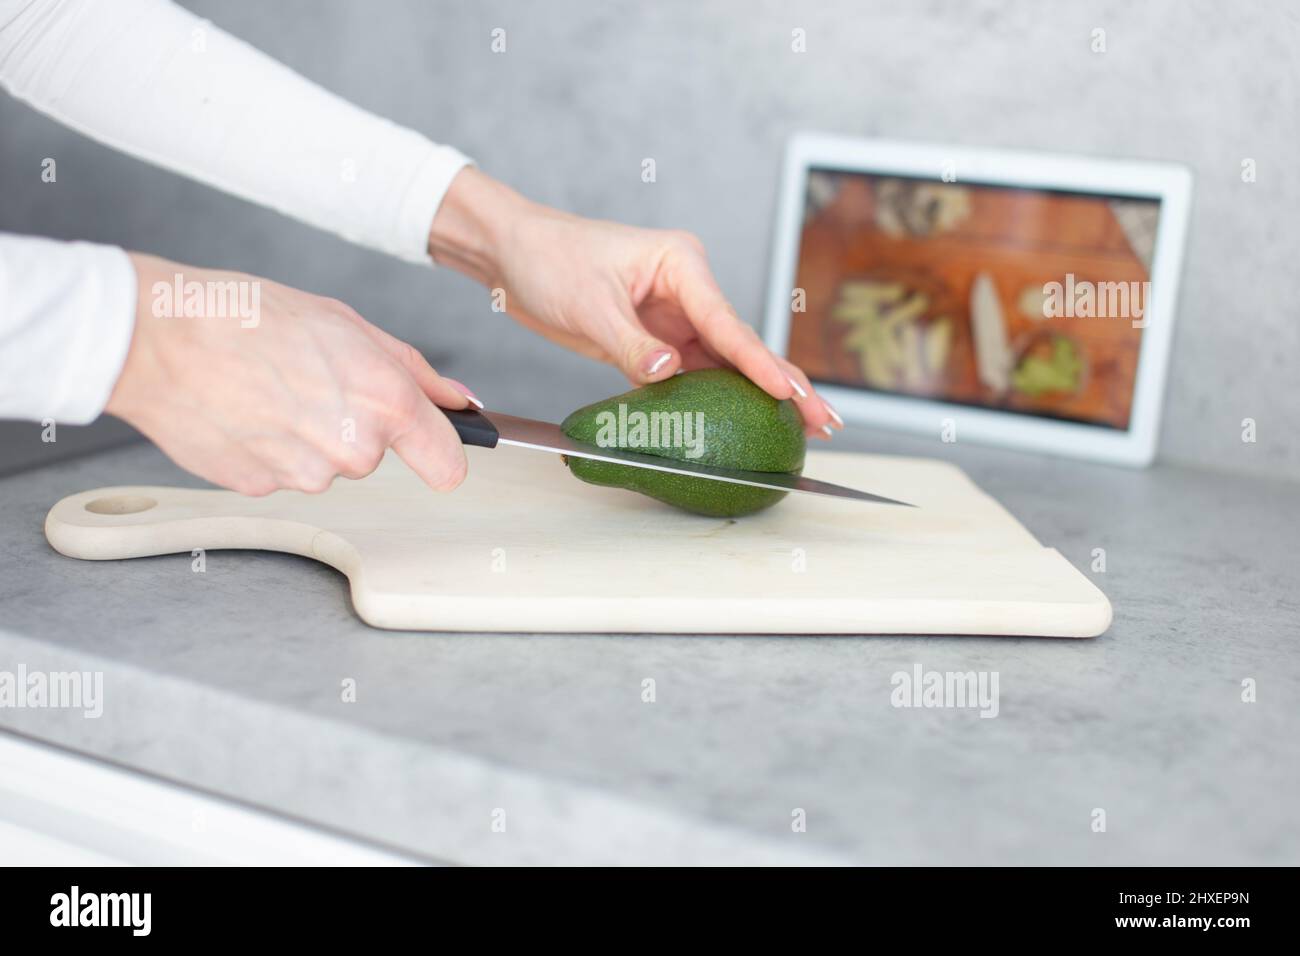 Woman hands halving avocado on cutting board, online cooking tutorial Stock Photo